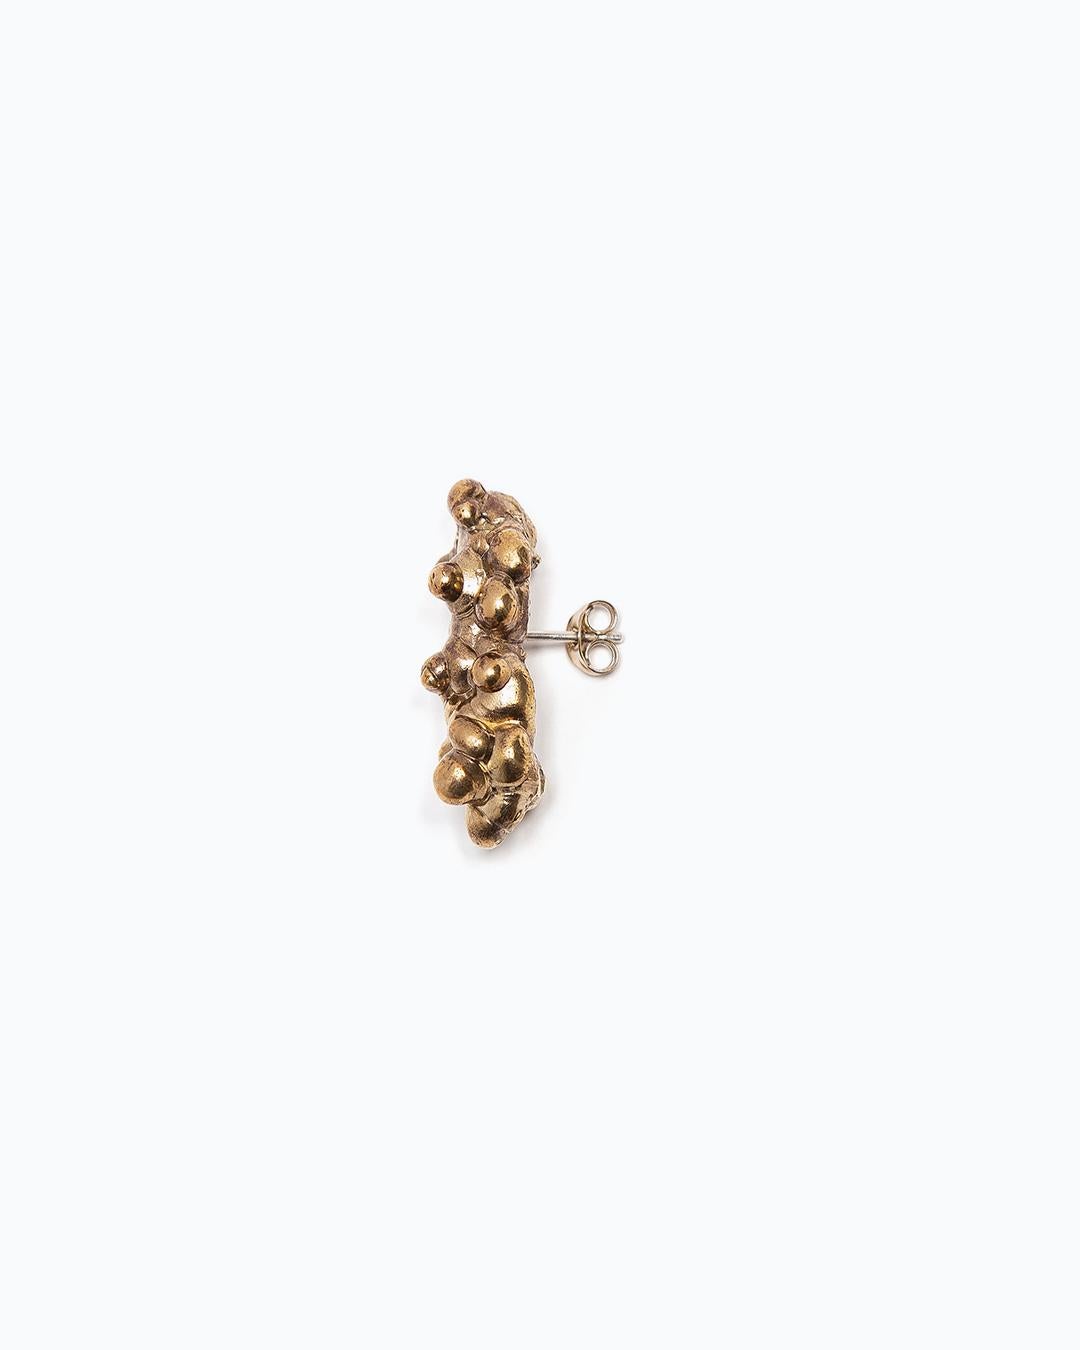 Rigido's NiCl2 is a silver earring with an organic shape and butterfly fastening. Sold as single, this earring is for pierced ears.

Available in Vermeil and Sterling Silver.

Handcrafted in Spain, this is a unique and quality piece.

This earring